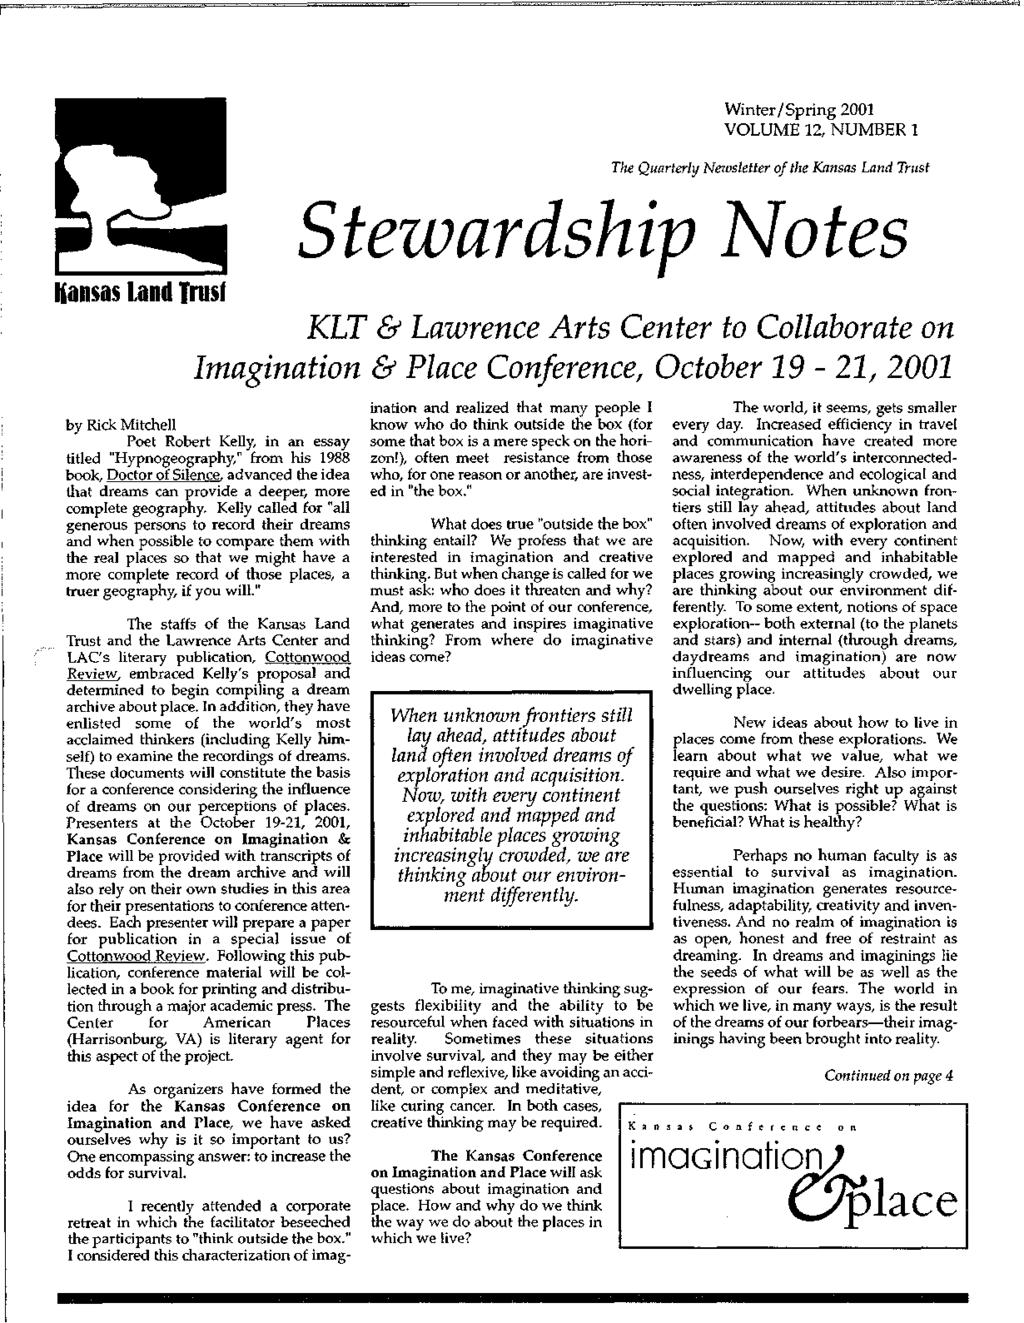 tewardship Winter / Spring 2001 VOLUME 12, NUMBER 1 The Quarterly Newsletter of the Kansas Land Trust Kansas land Trusf KLT & Lawrence Arts Center to Collaborate on Imagination & Place Conference,